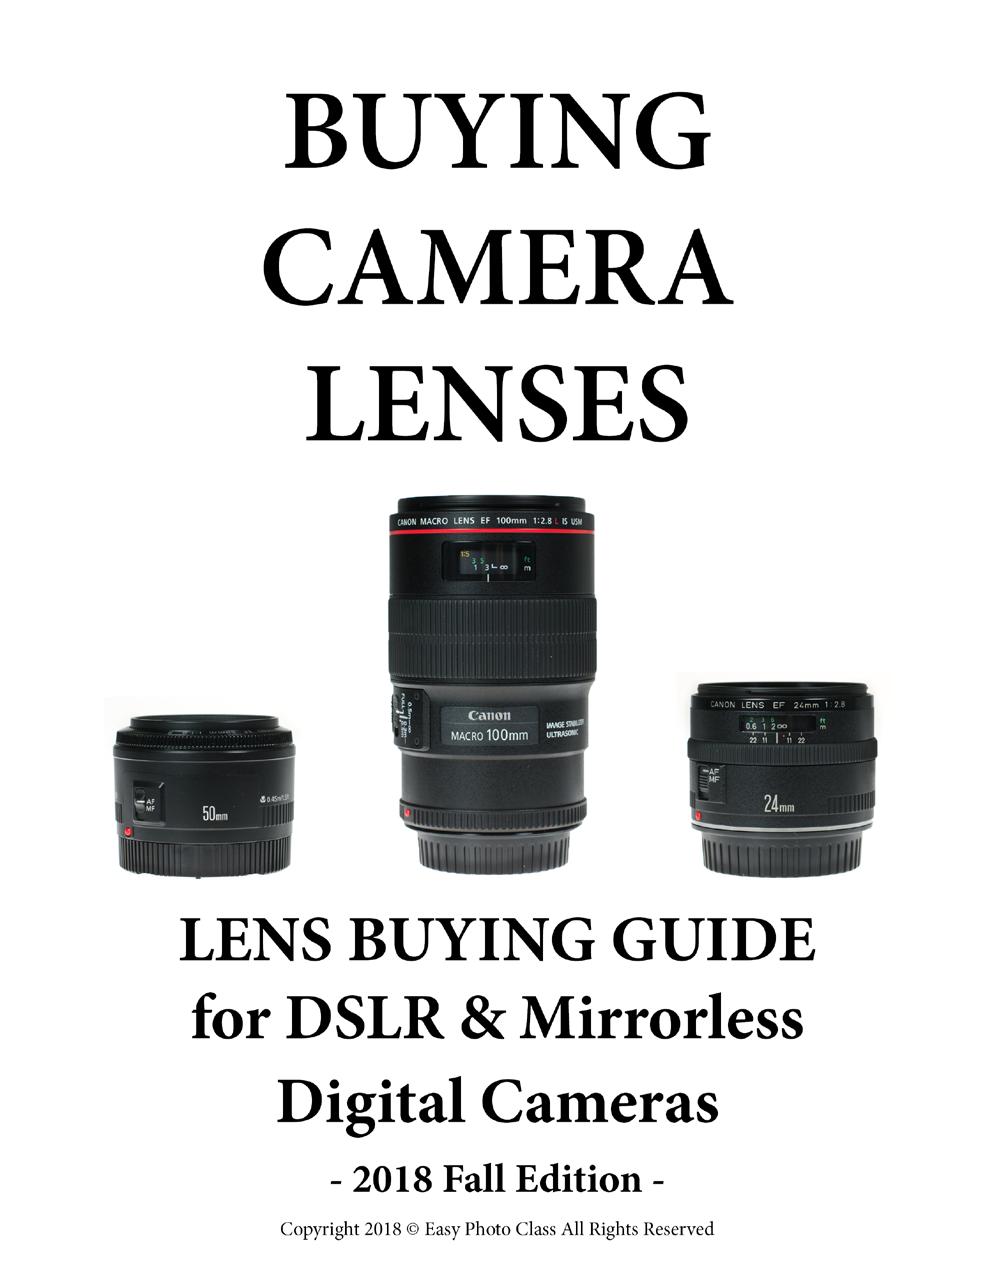 Use Our Camera & Lens Guides to Choose a Camera Choose the type of camera, camera size, image